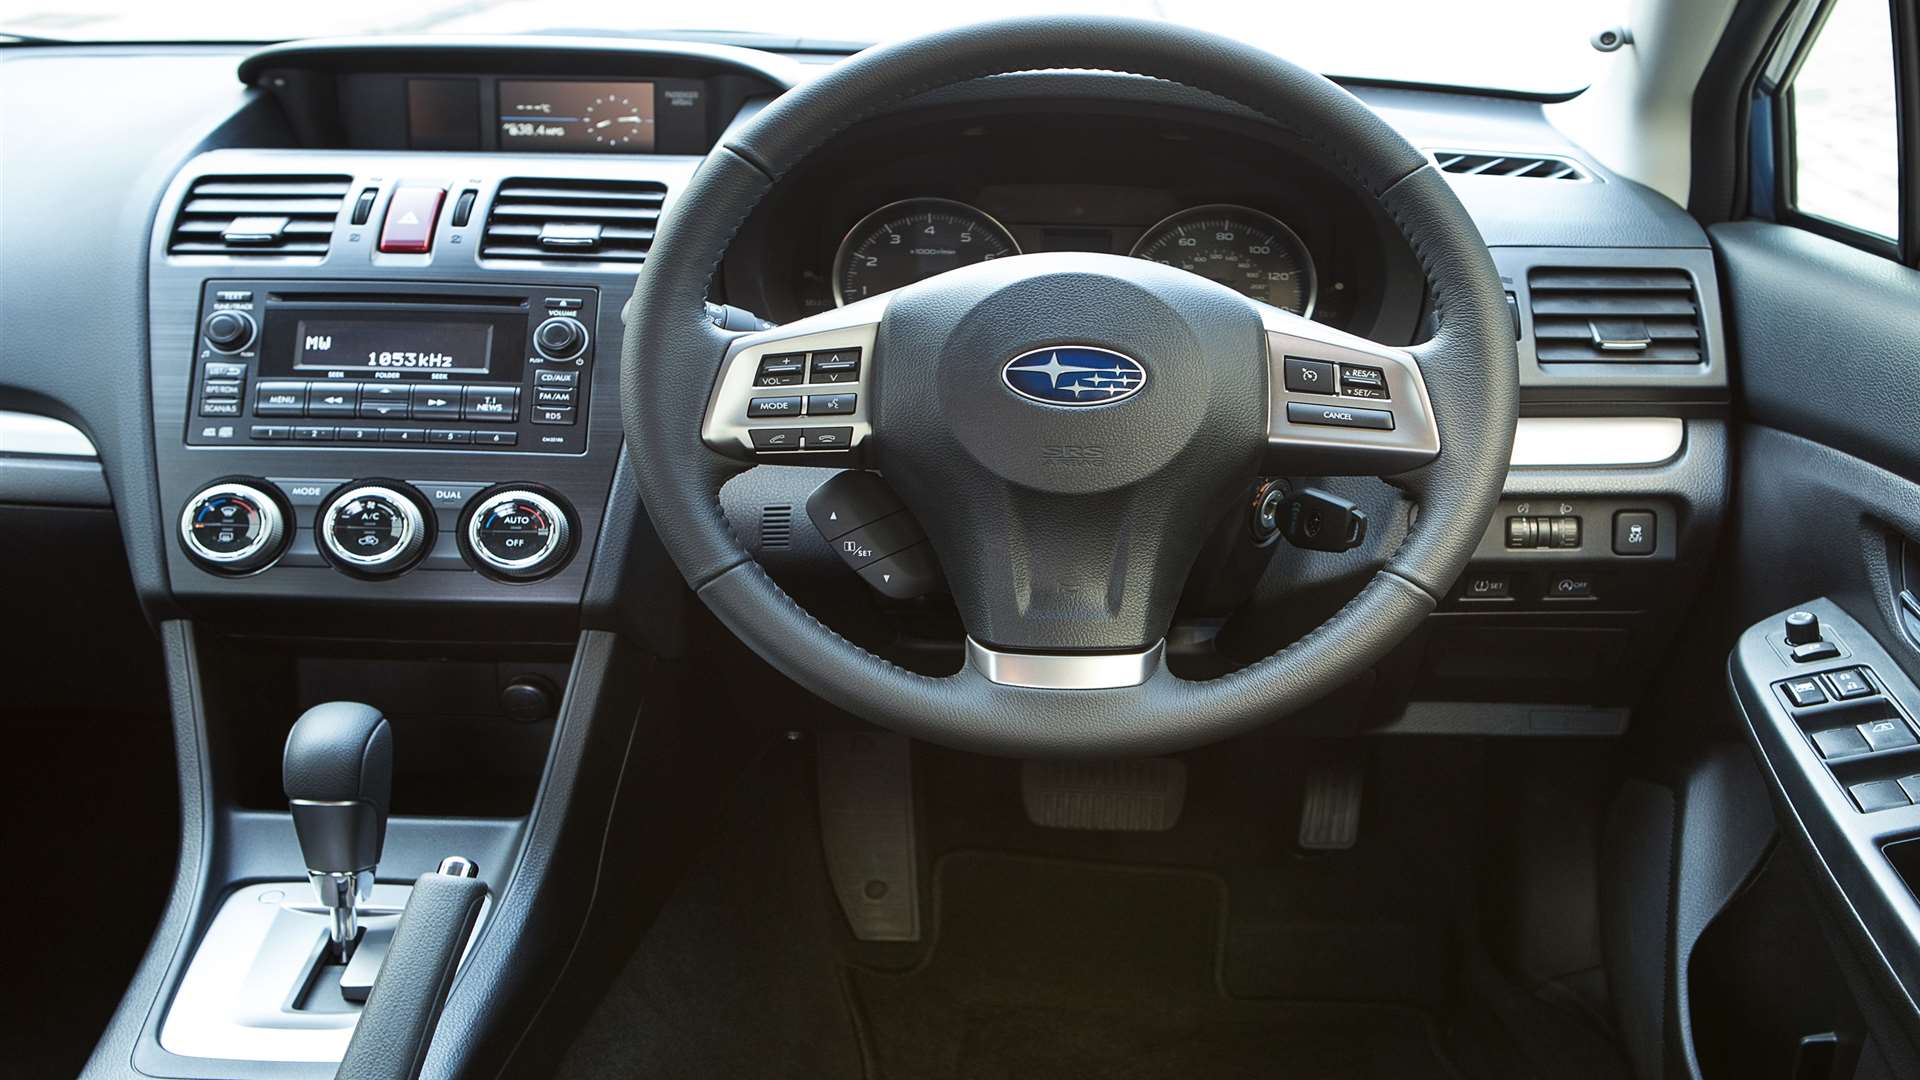 The interior is one of Subaru's better efforts